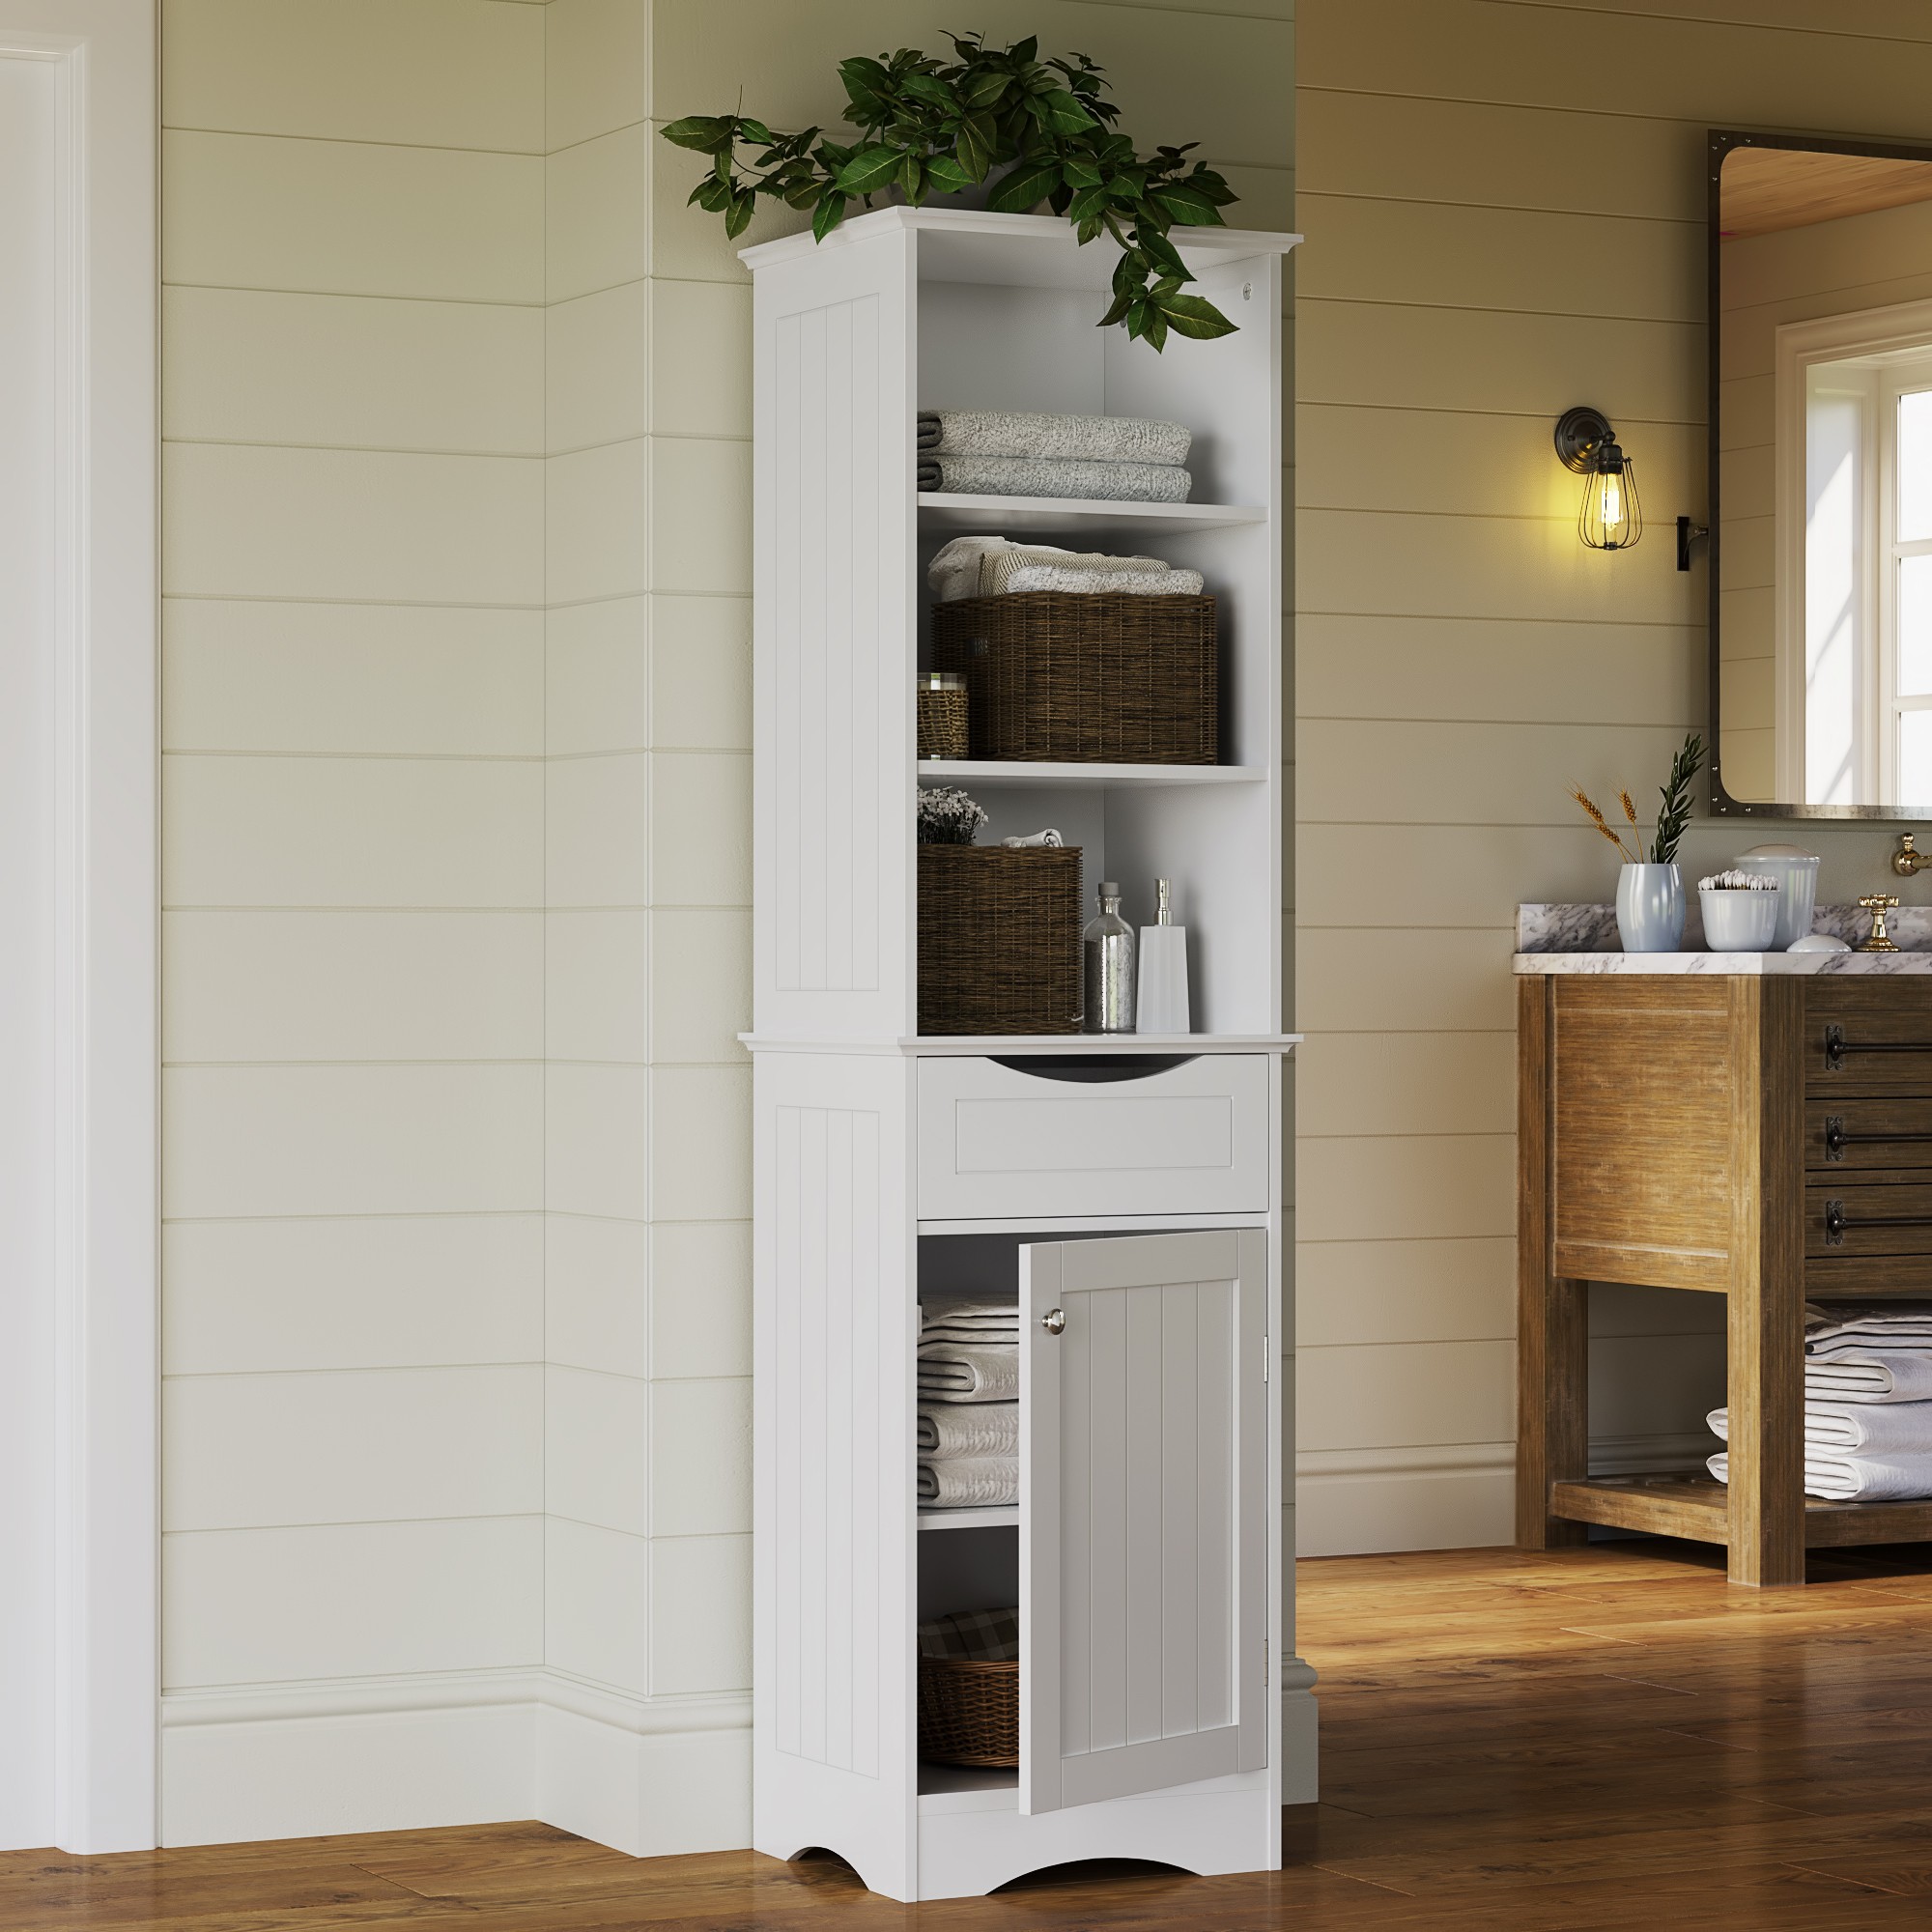 Tall White Bathroom Cabinet - Get All You Need